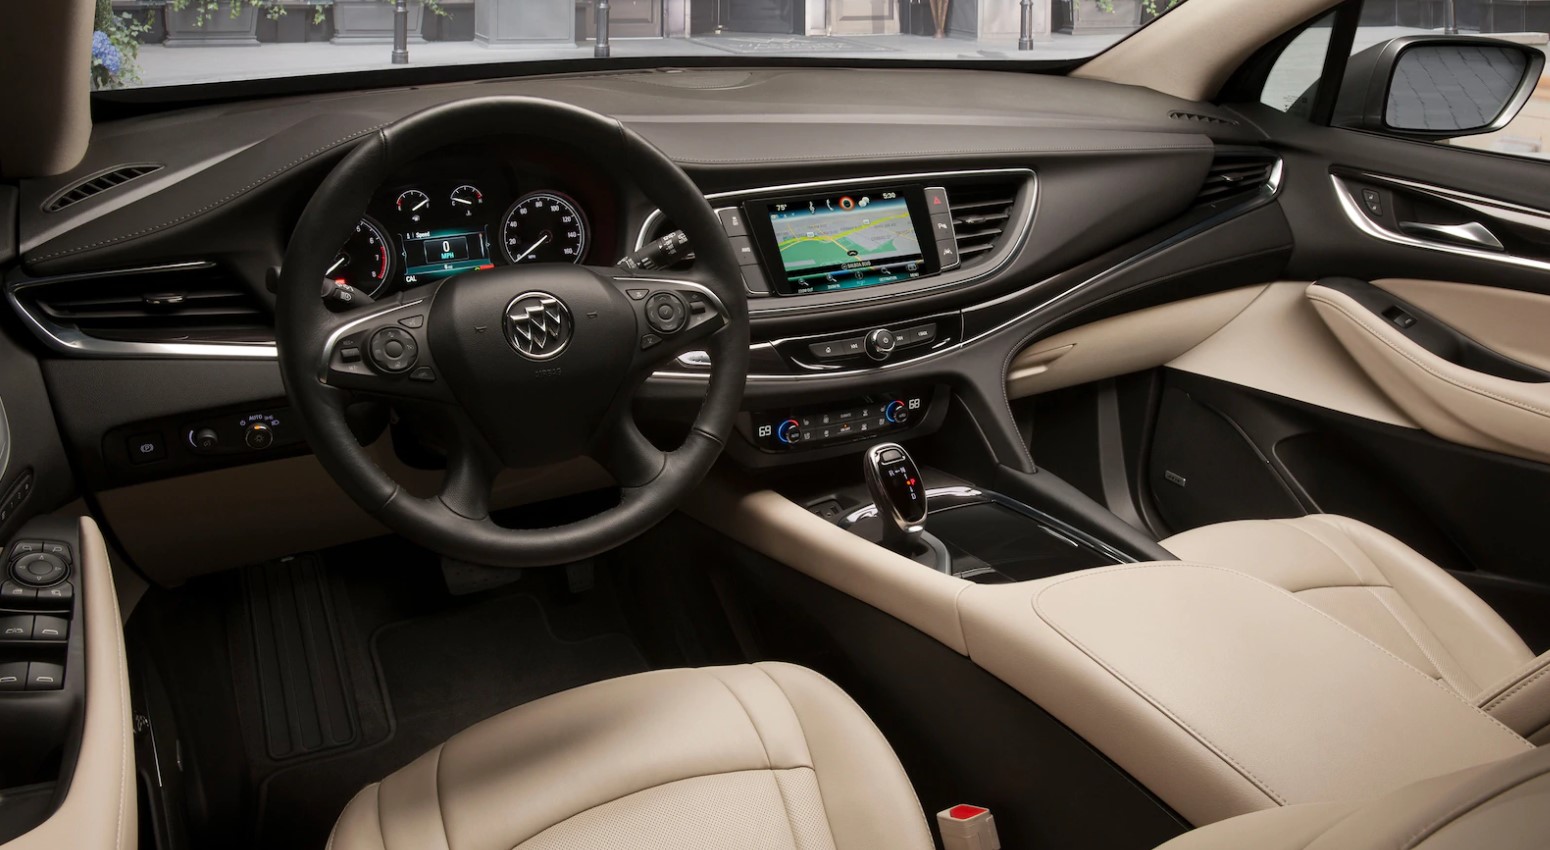 2019 Buick Enclave Front Interior Dashboard Picture